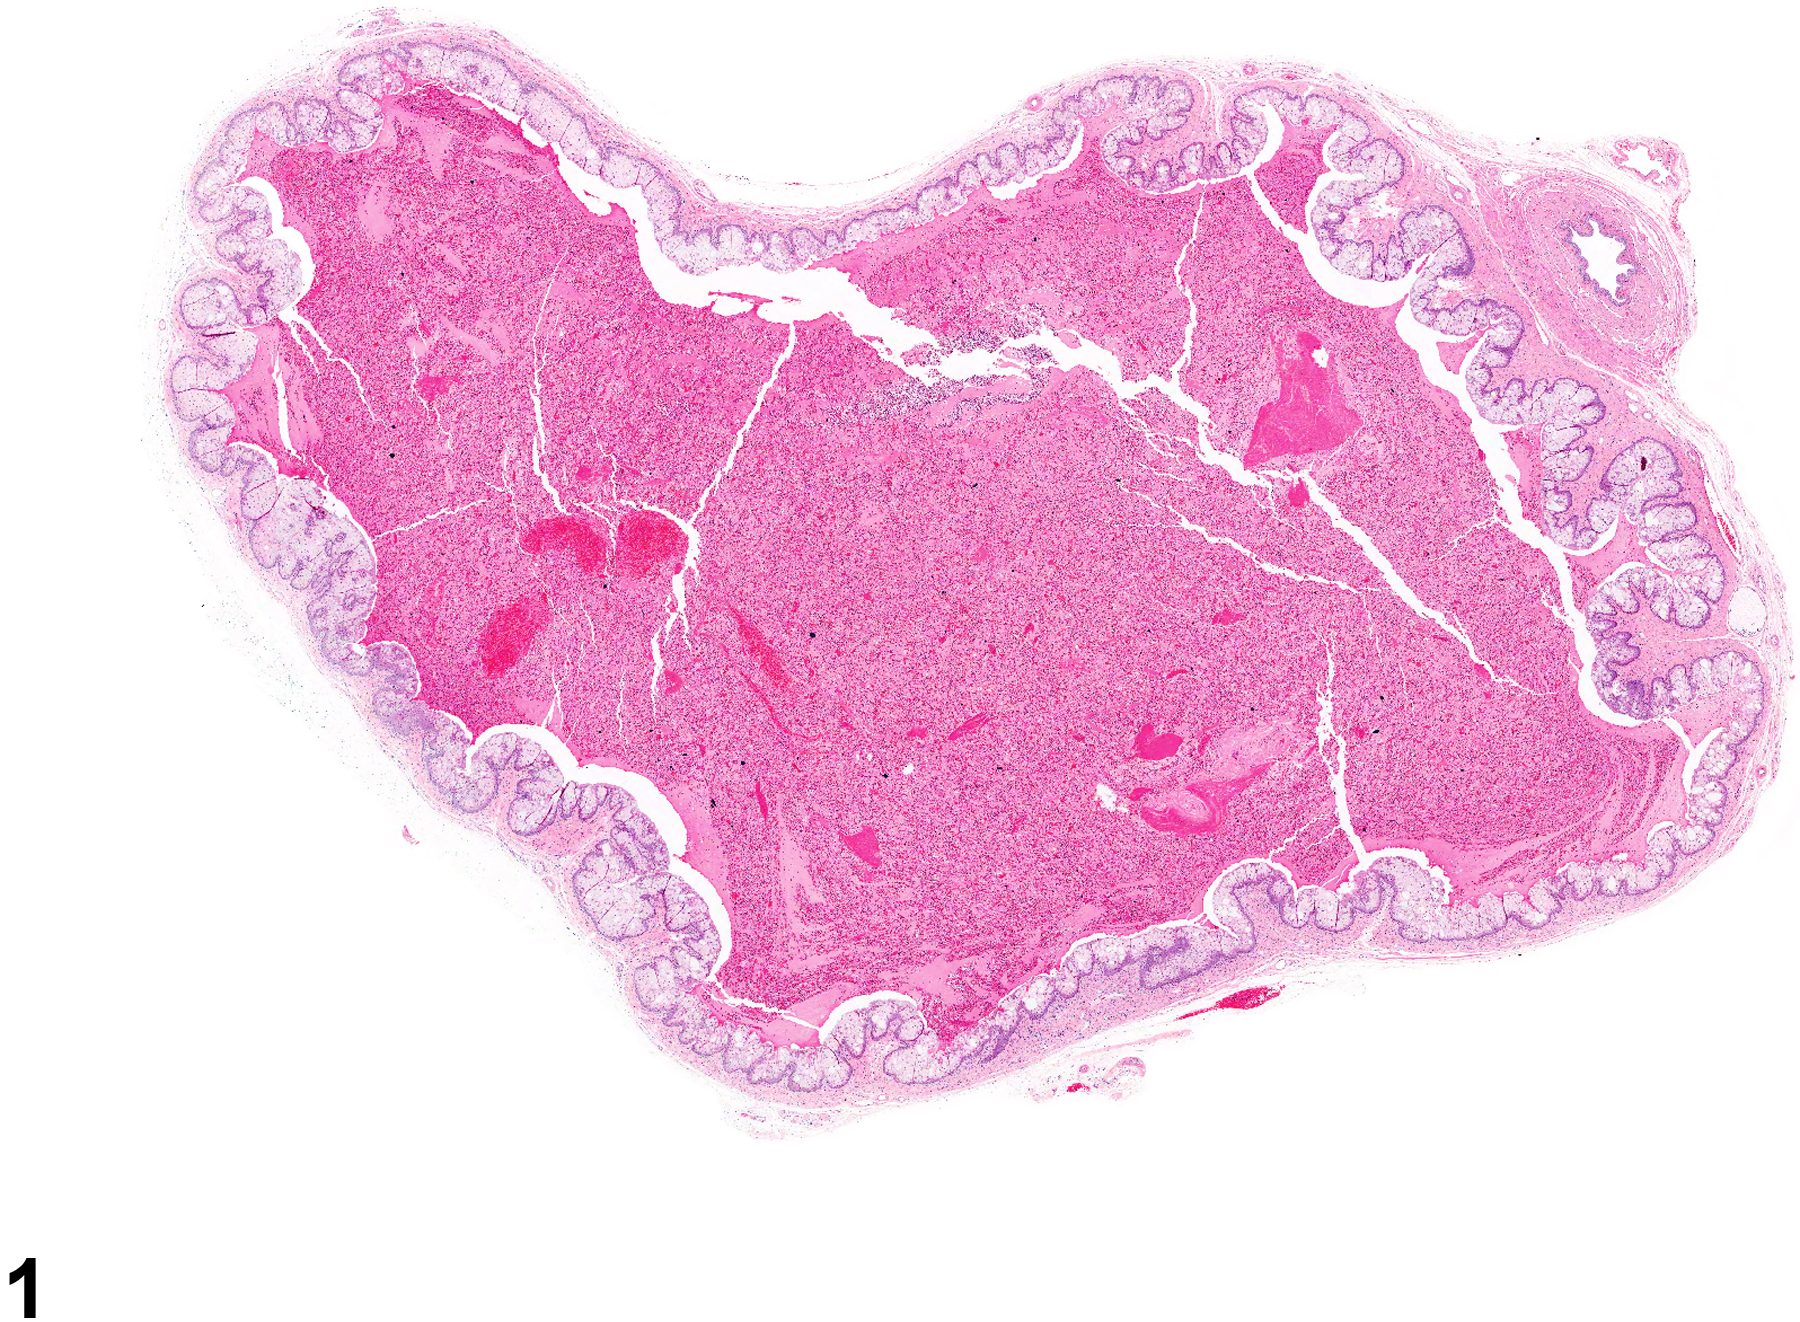 Image of inflammation, acute in the vagina from a female F344/N rat in a chronic study